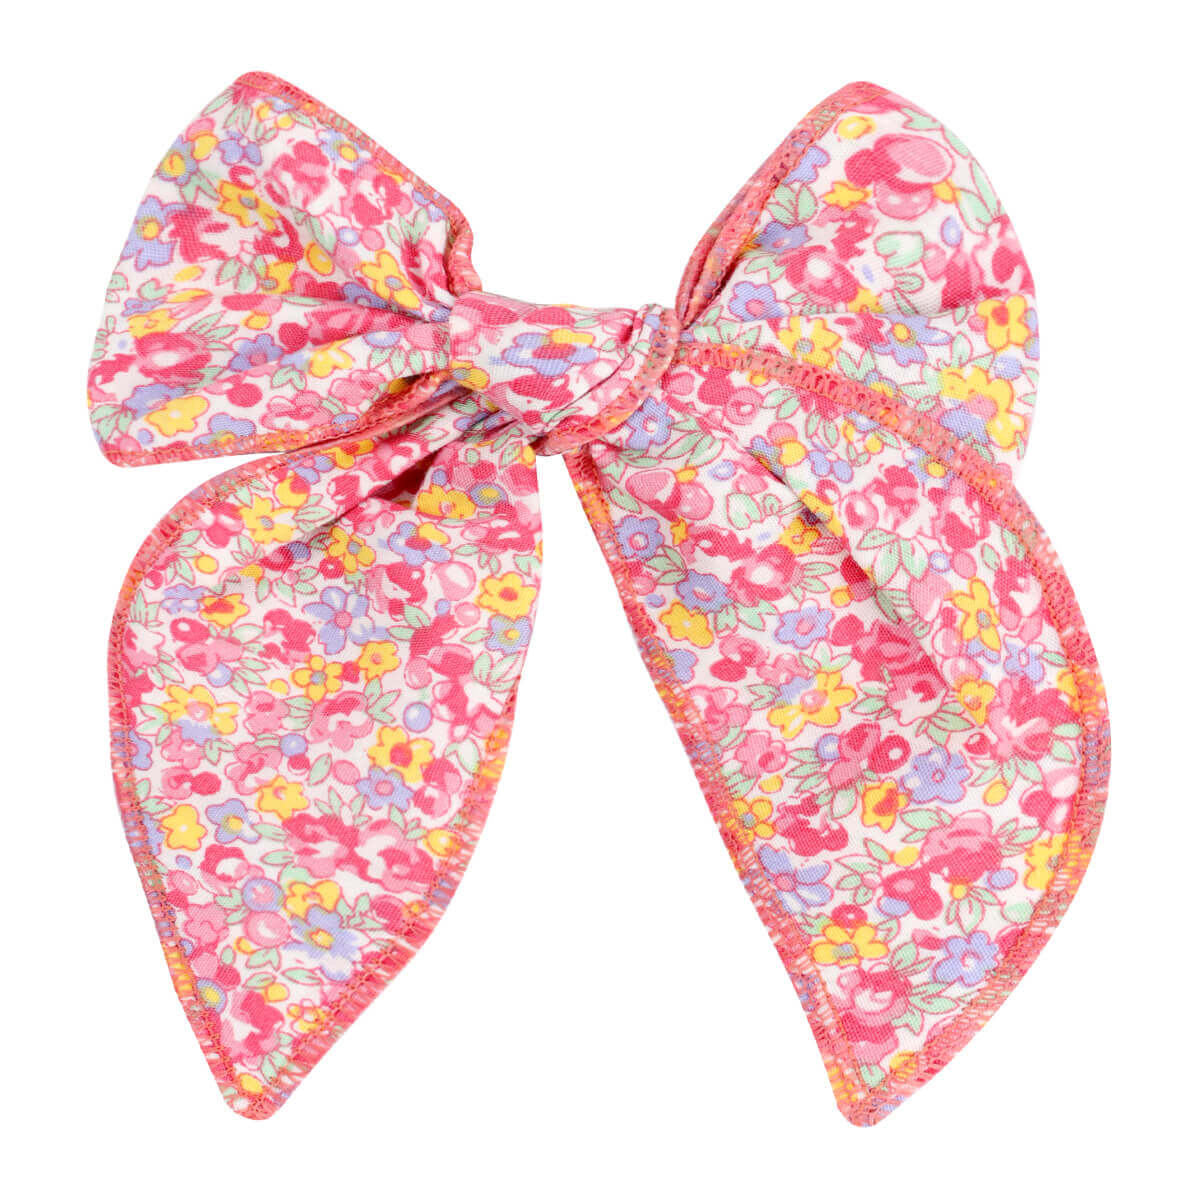 5'' Colorful Flowers Fable Hair Bows